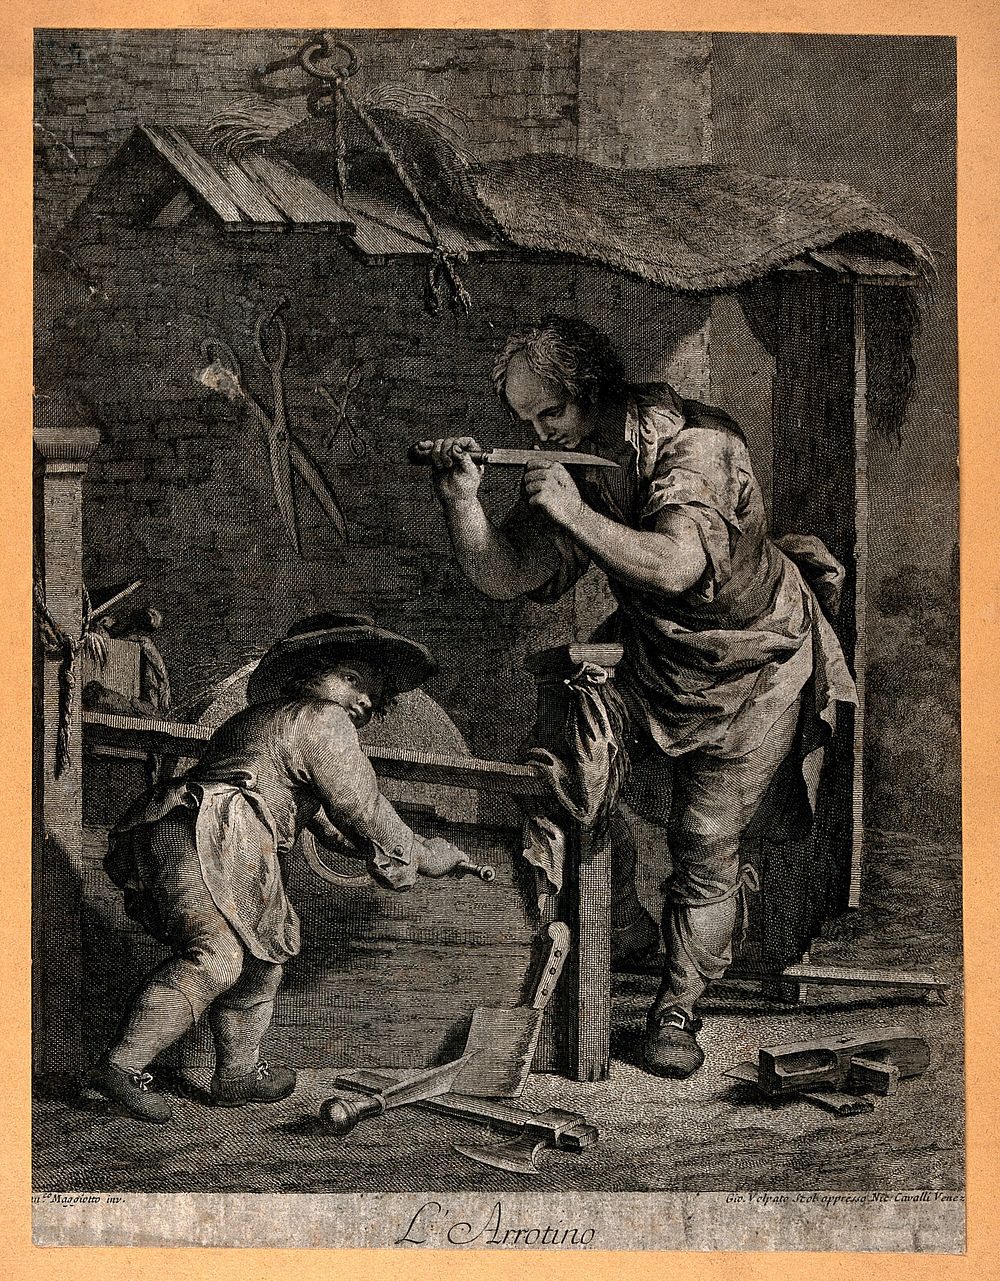 A man is testing the sharpness of a blade which he has been grinding on the wheel turned by the boy. Engraving by Gio.…